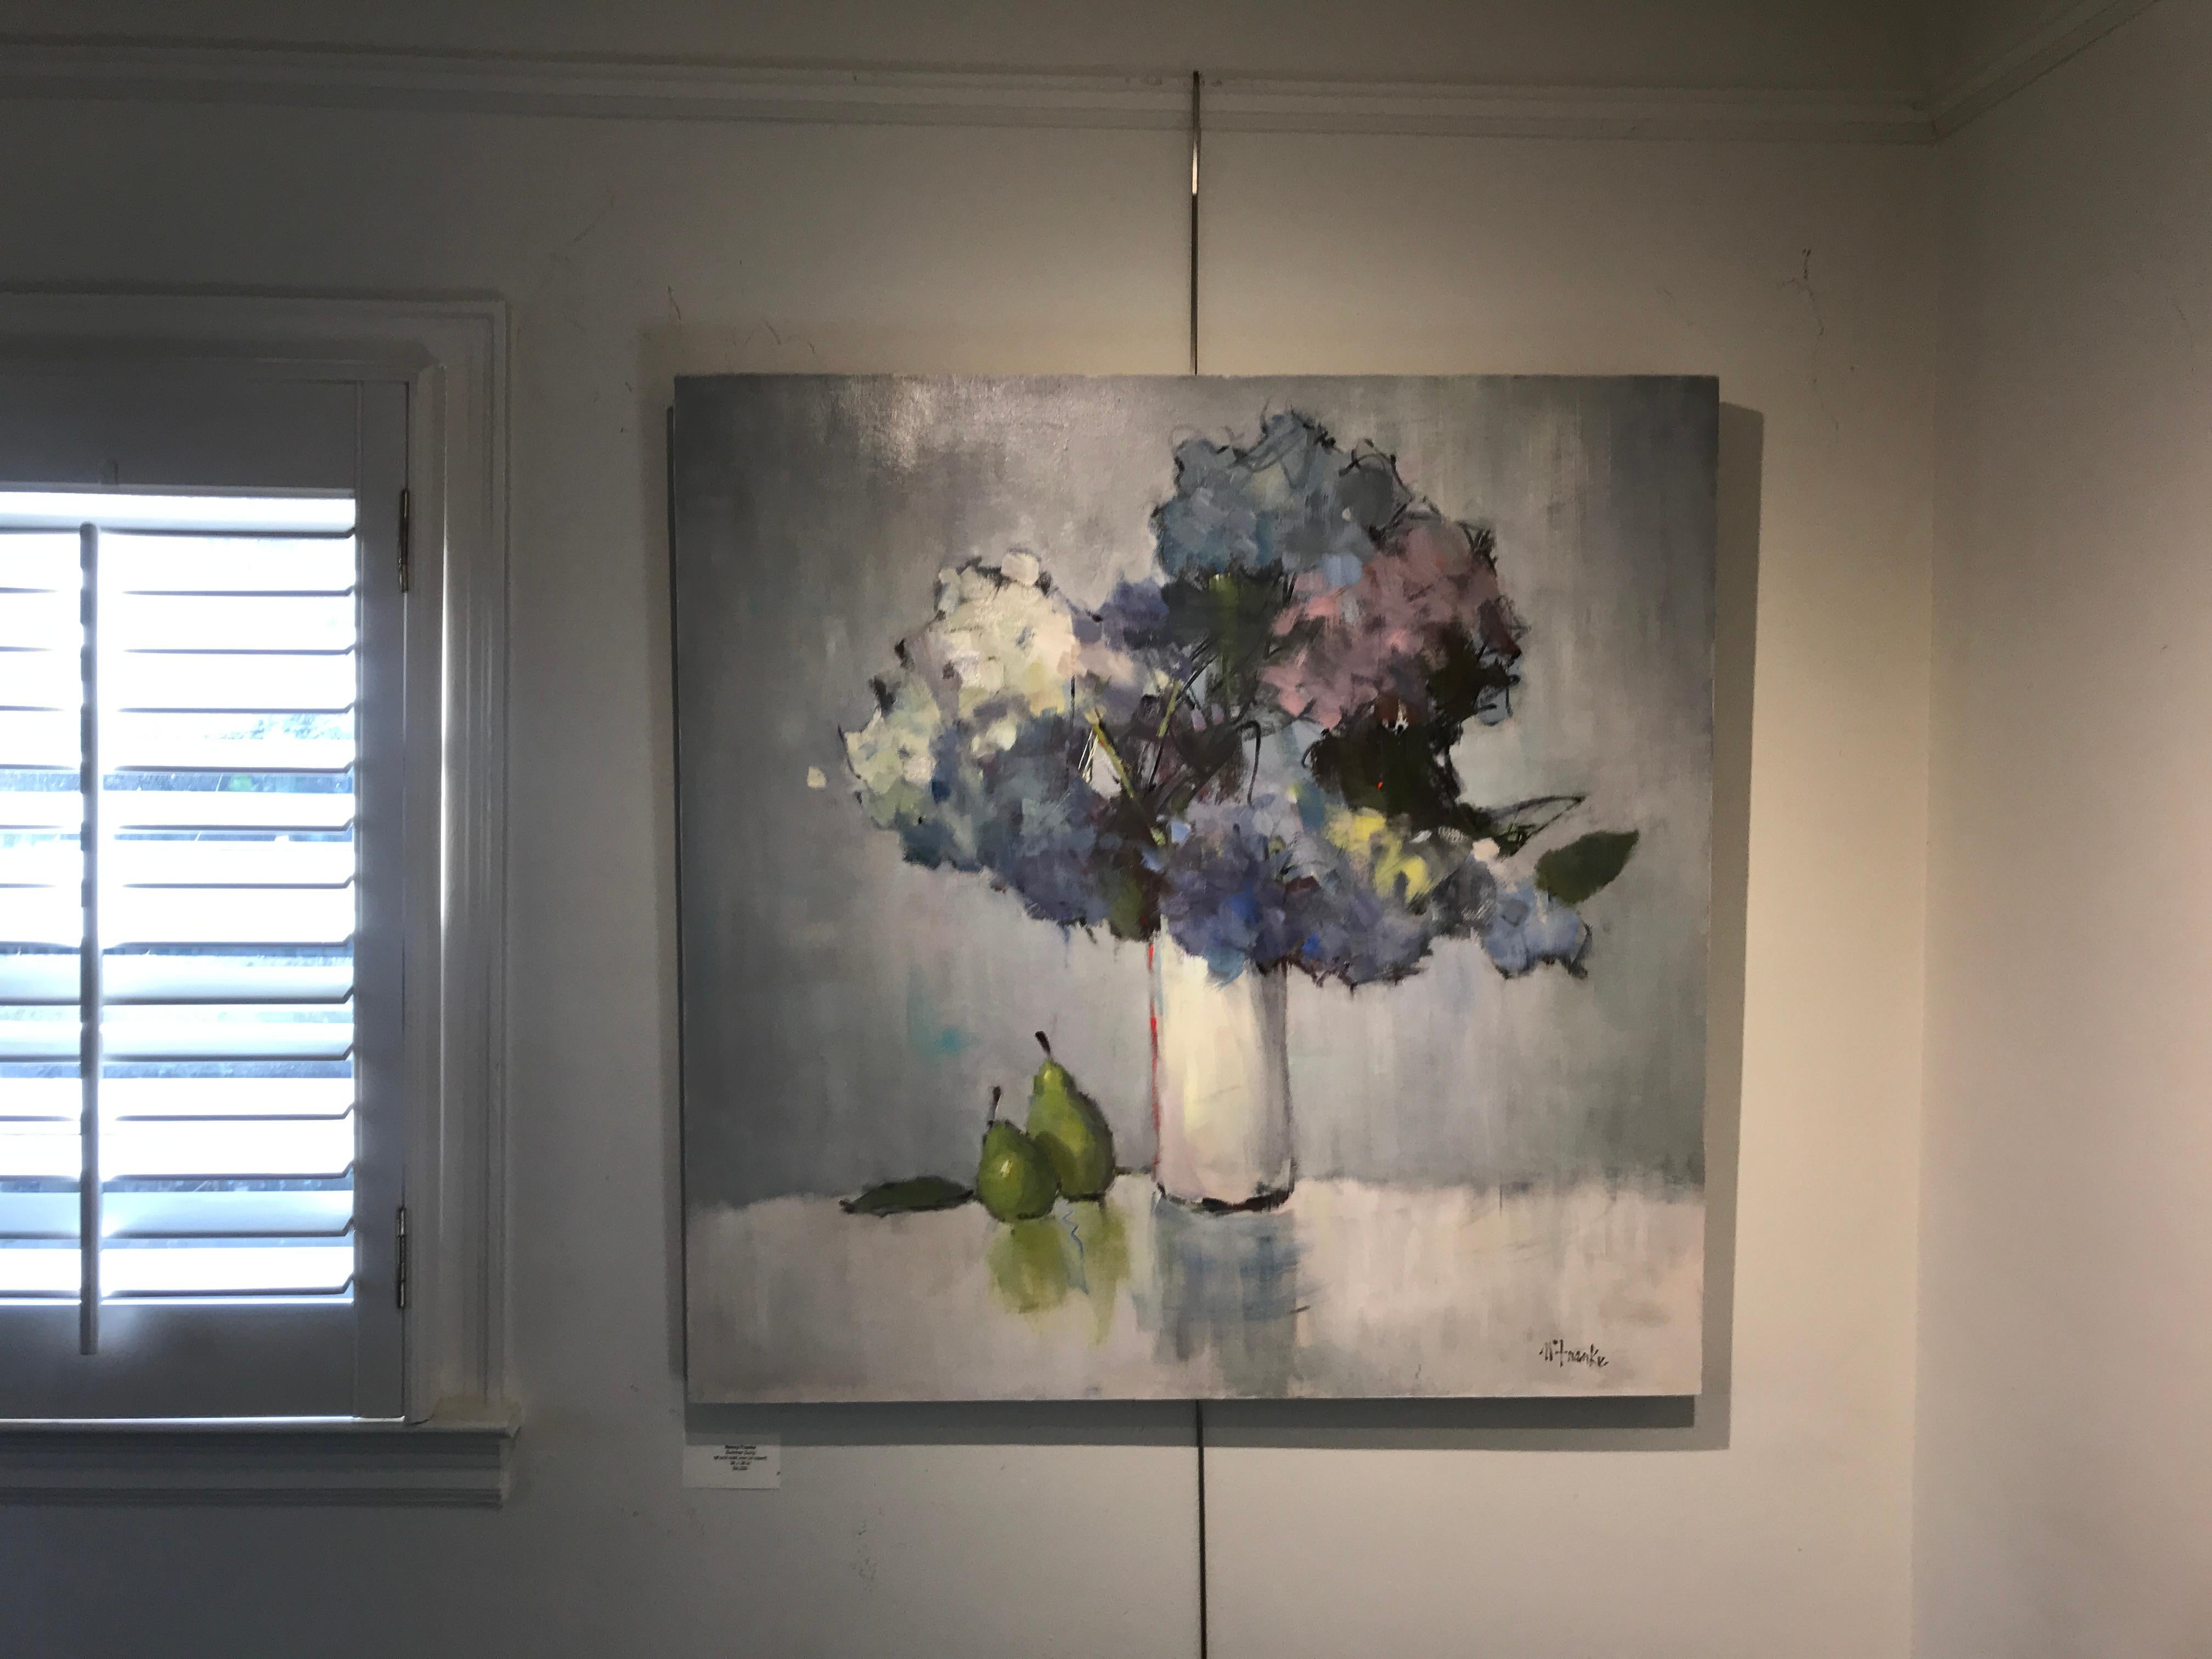 'Summer Song' is a medium size square-shaped Impressionist oil and cold wax on board floral painting created by American artist Nancy Franke in 2019. Featuring a palette made of blue, grey, pink, white and green tones among others, the painting